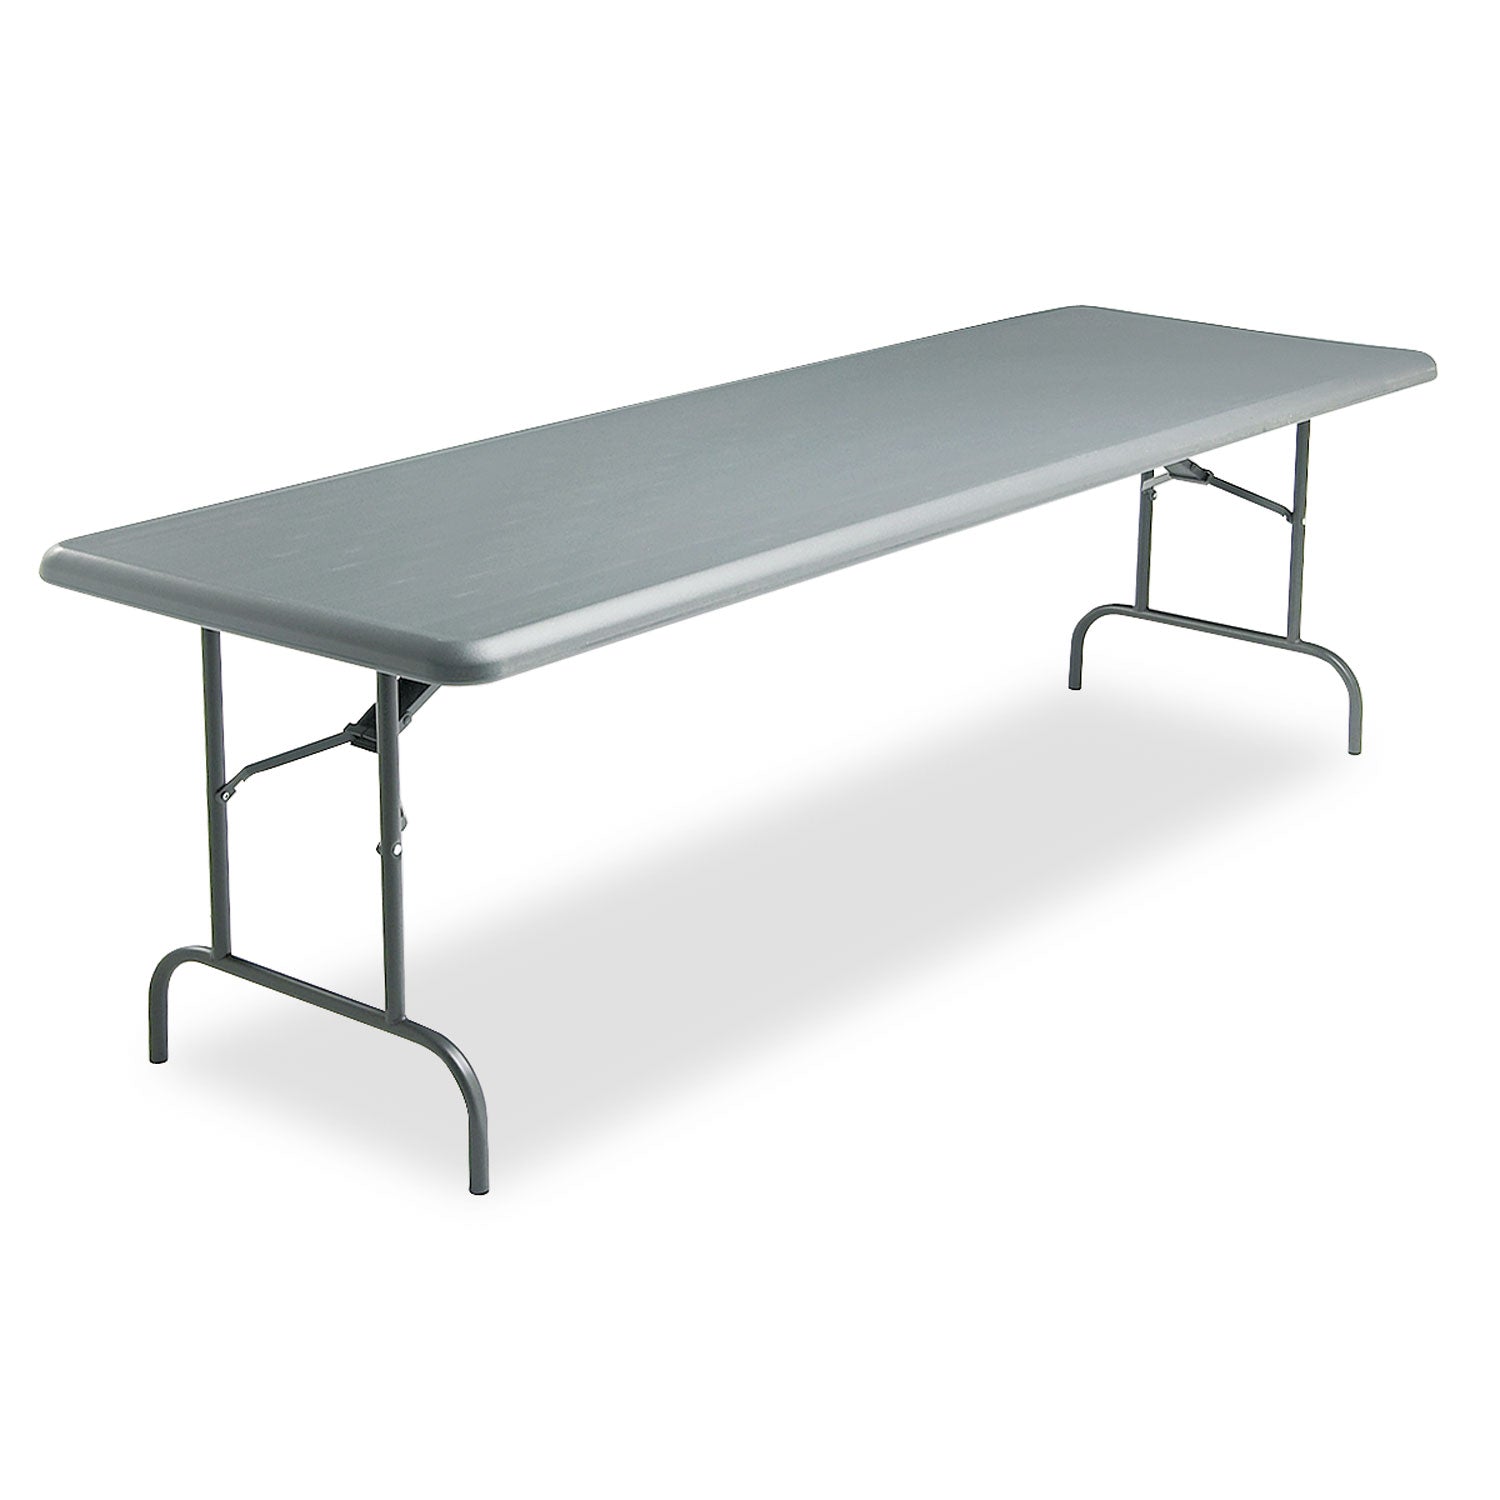 IndestrucTable Industrial Folding Table, Rectangular, 96" x 30" x 29", Charcoal - 